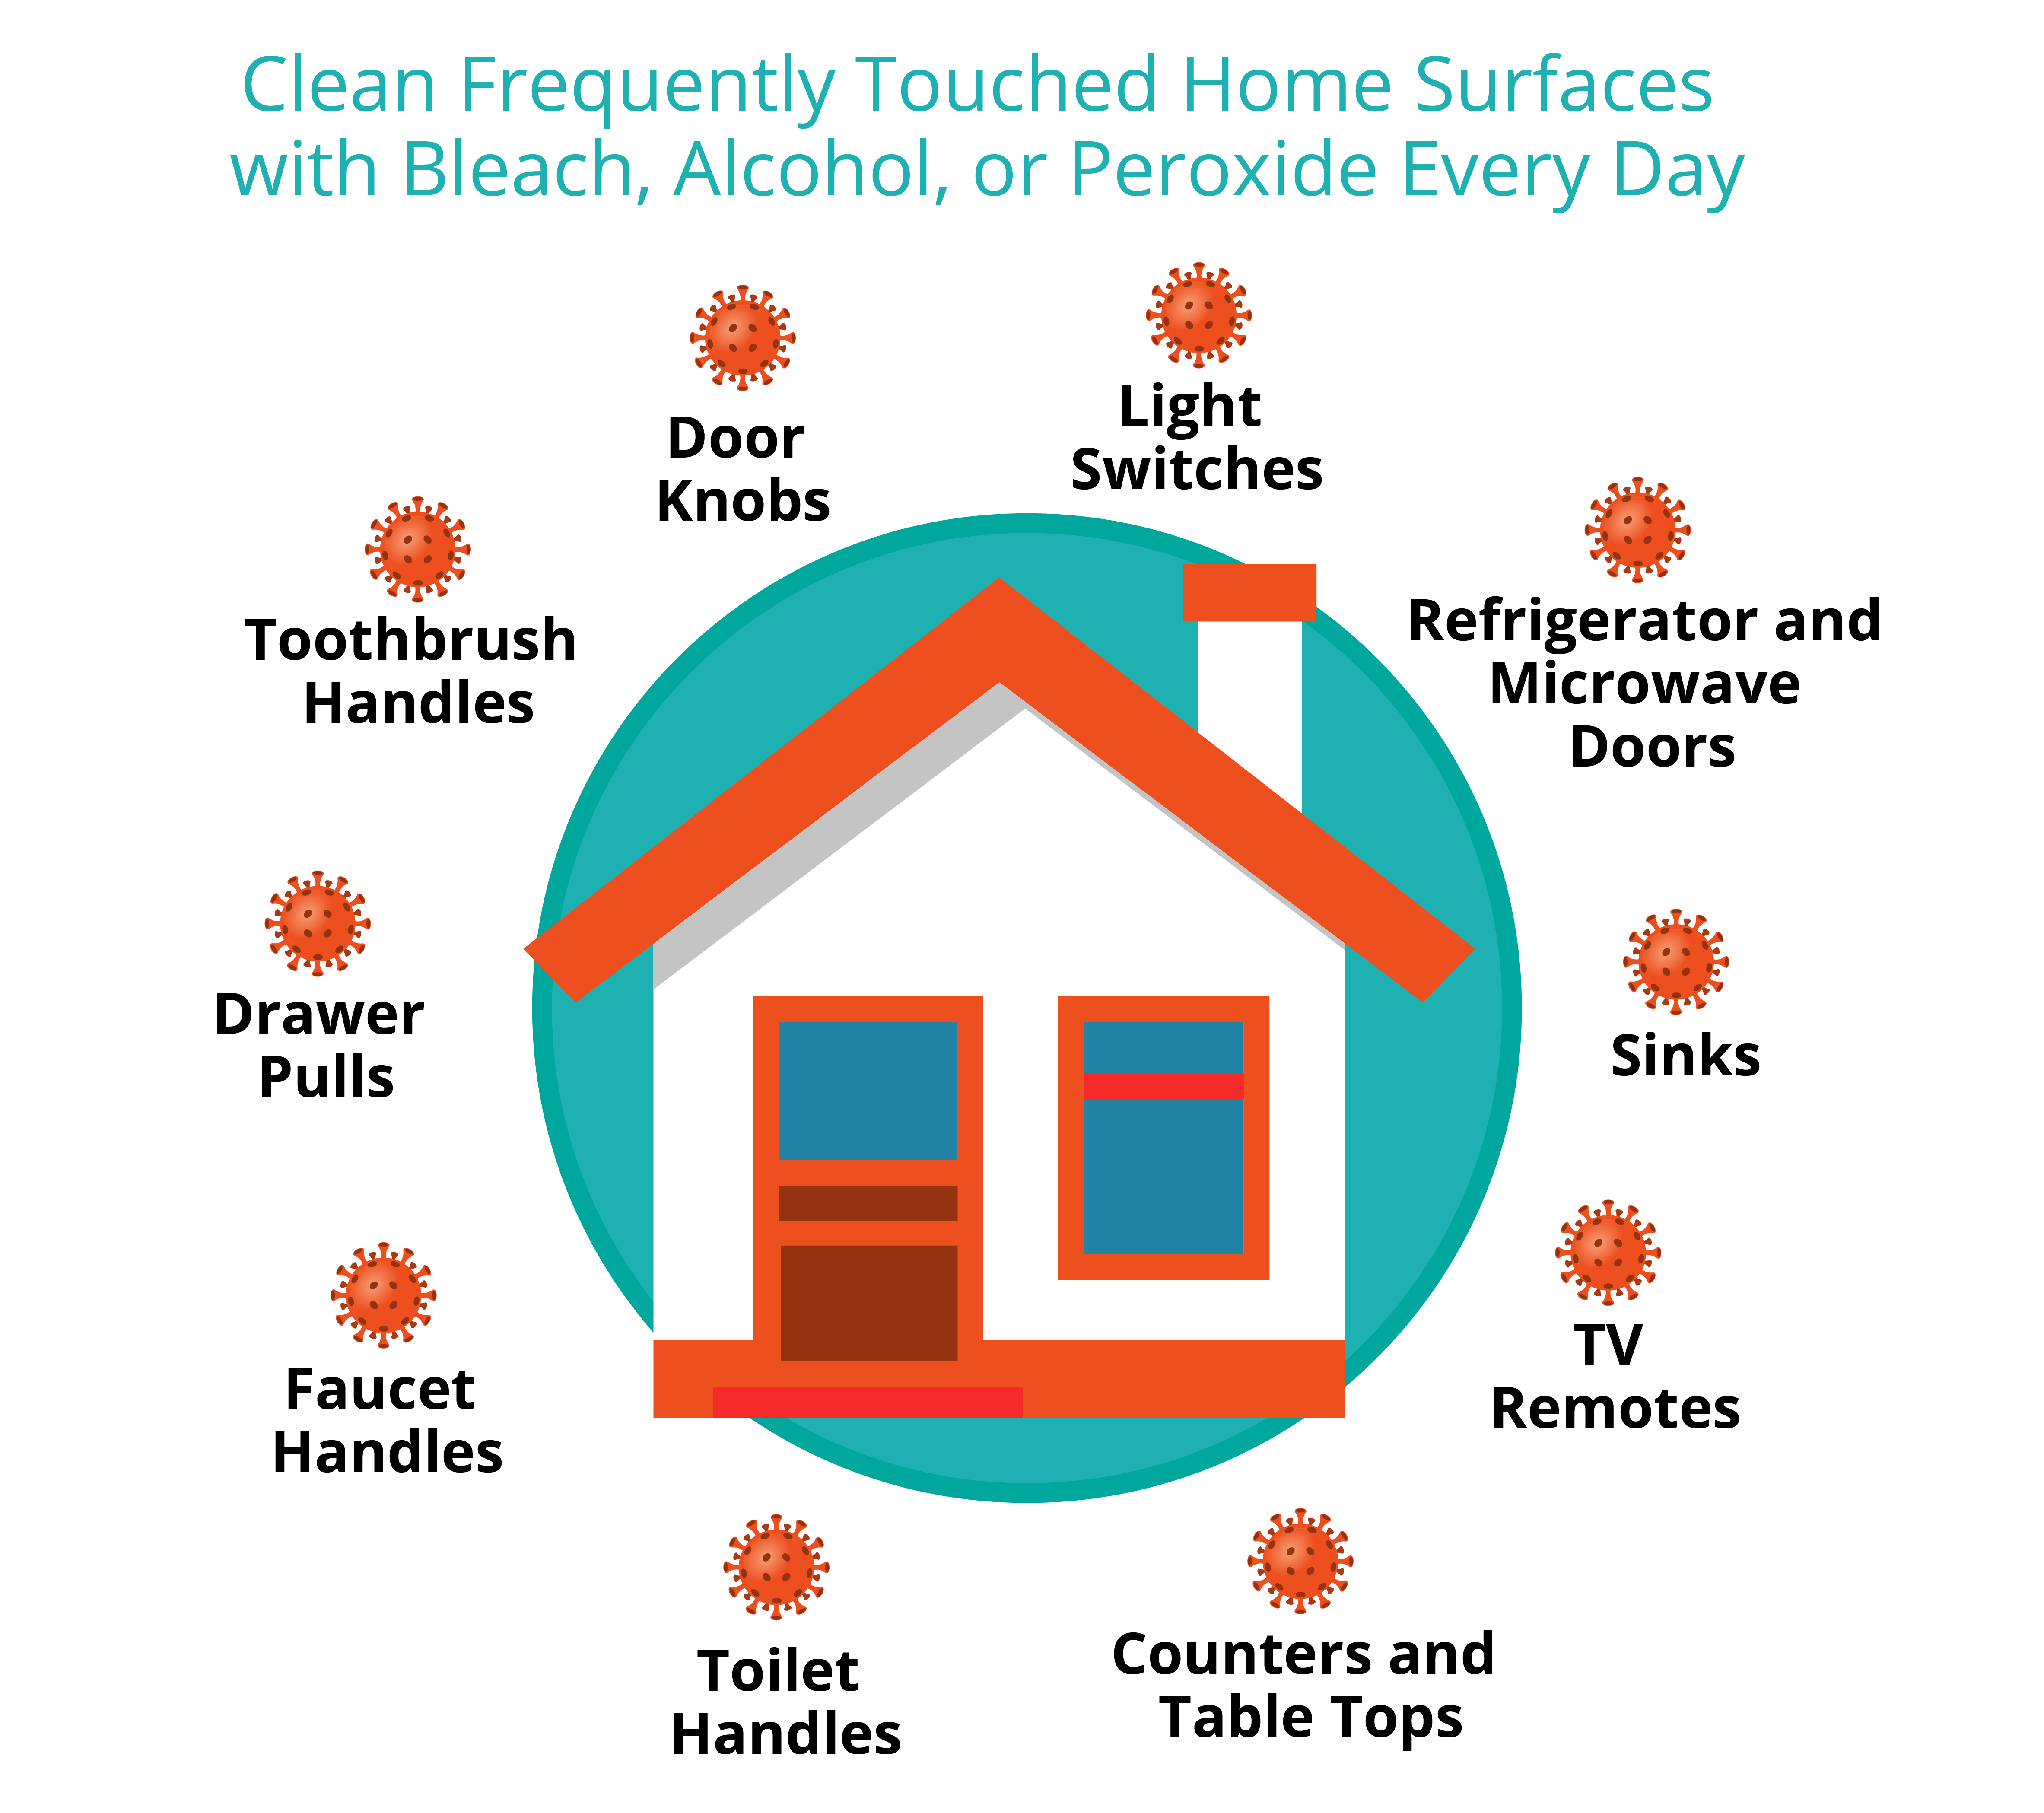 How to Sanitize Your House and Car During the Coronavirus